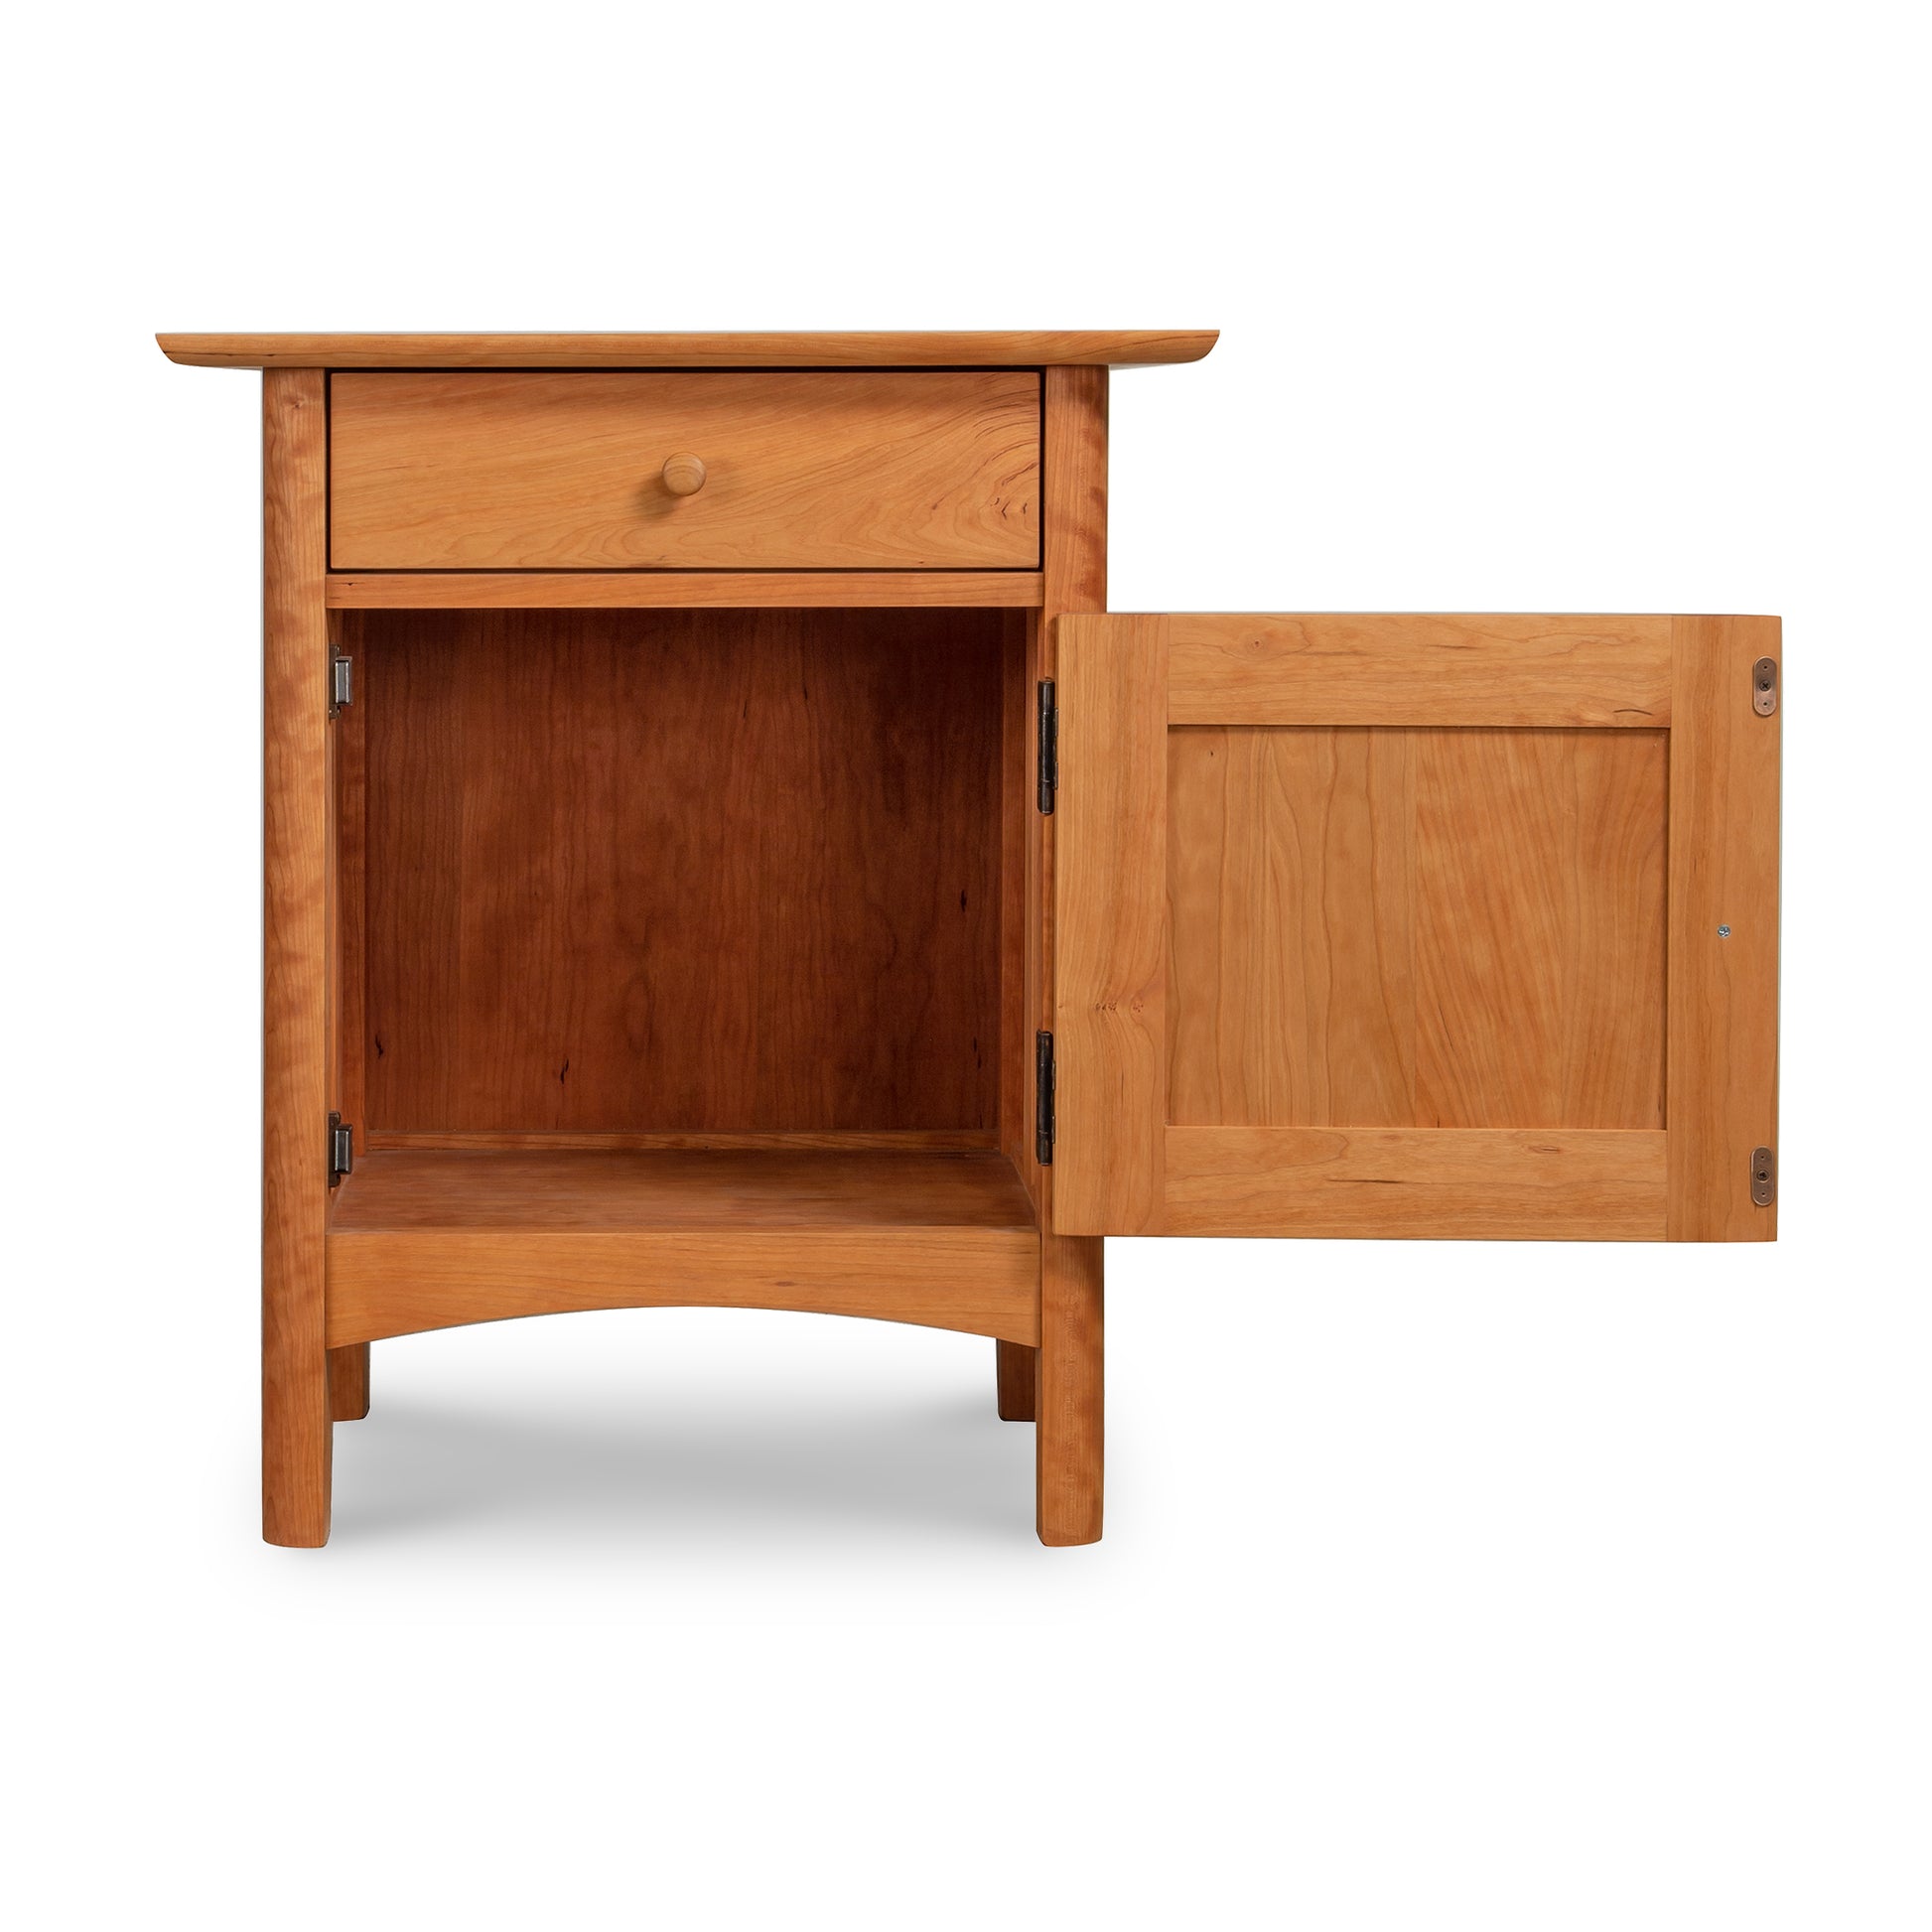 Solid wood Vermont Furniture Designs Heartwood Shaker 1-Drawer Nightstand with Door, showing an empty storage compartment, against a white background.